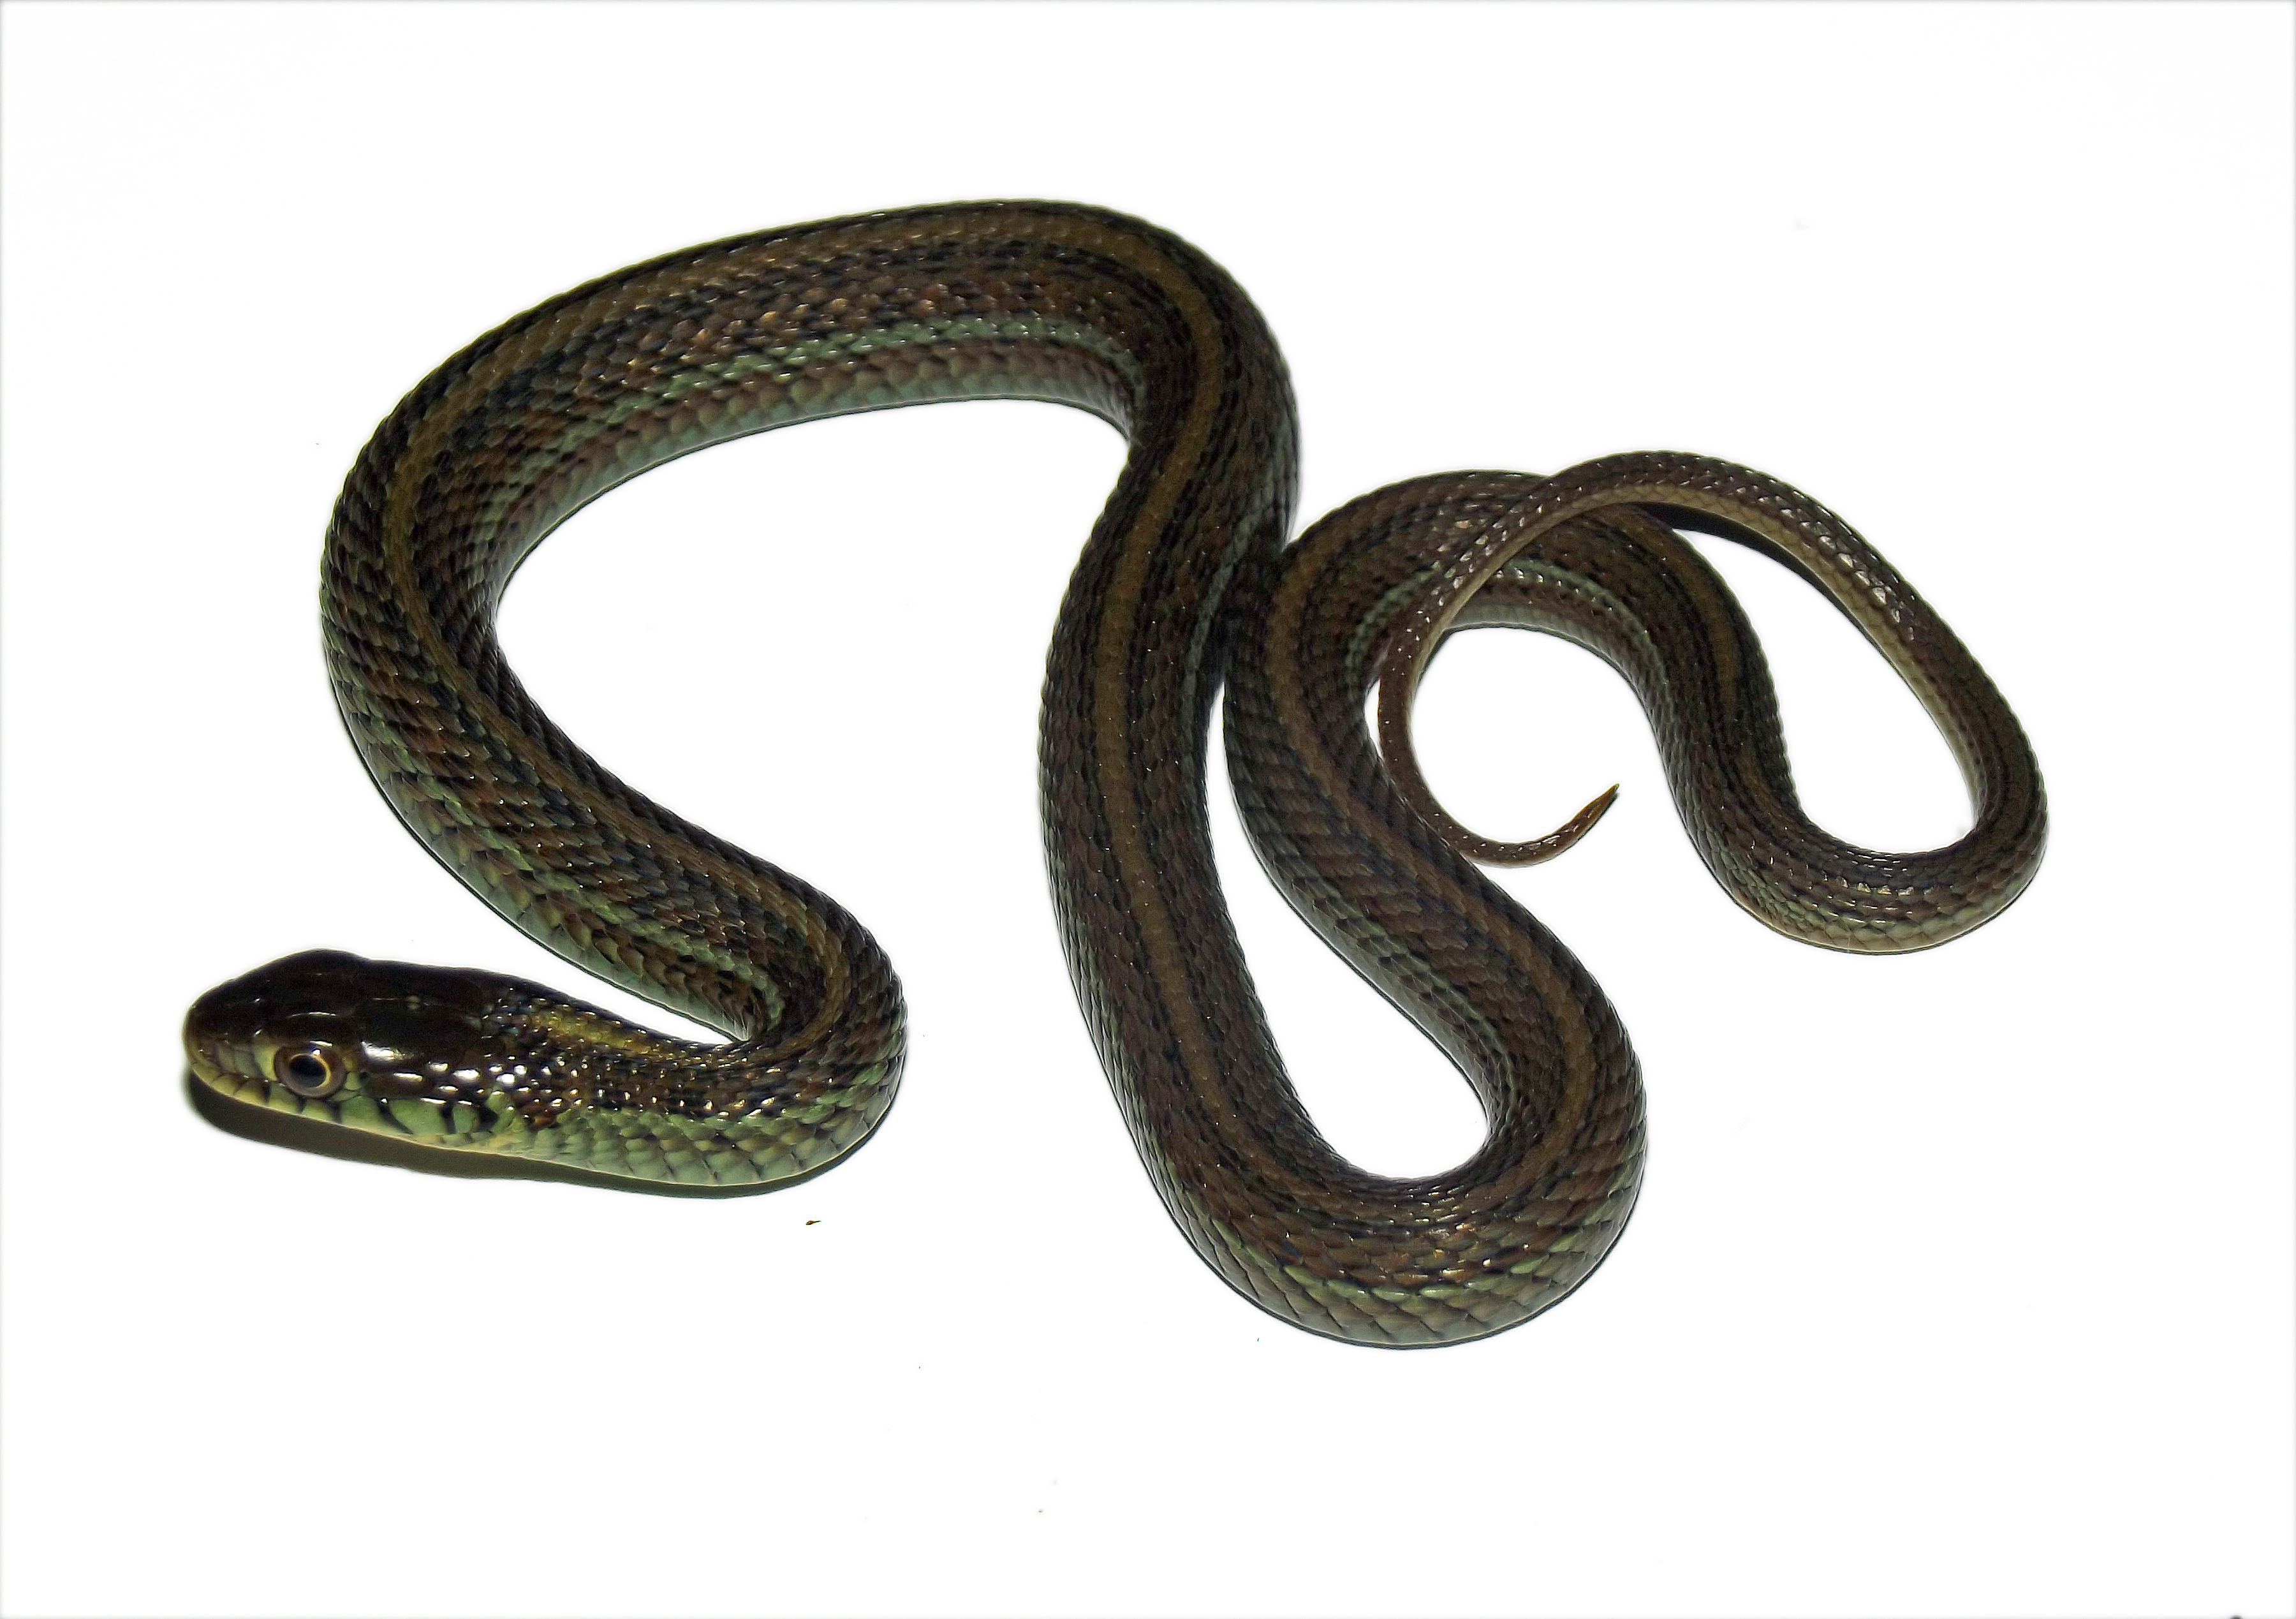 thamnophis eques obscurus 1